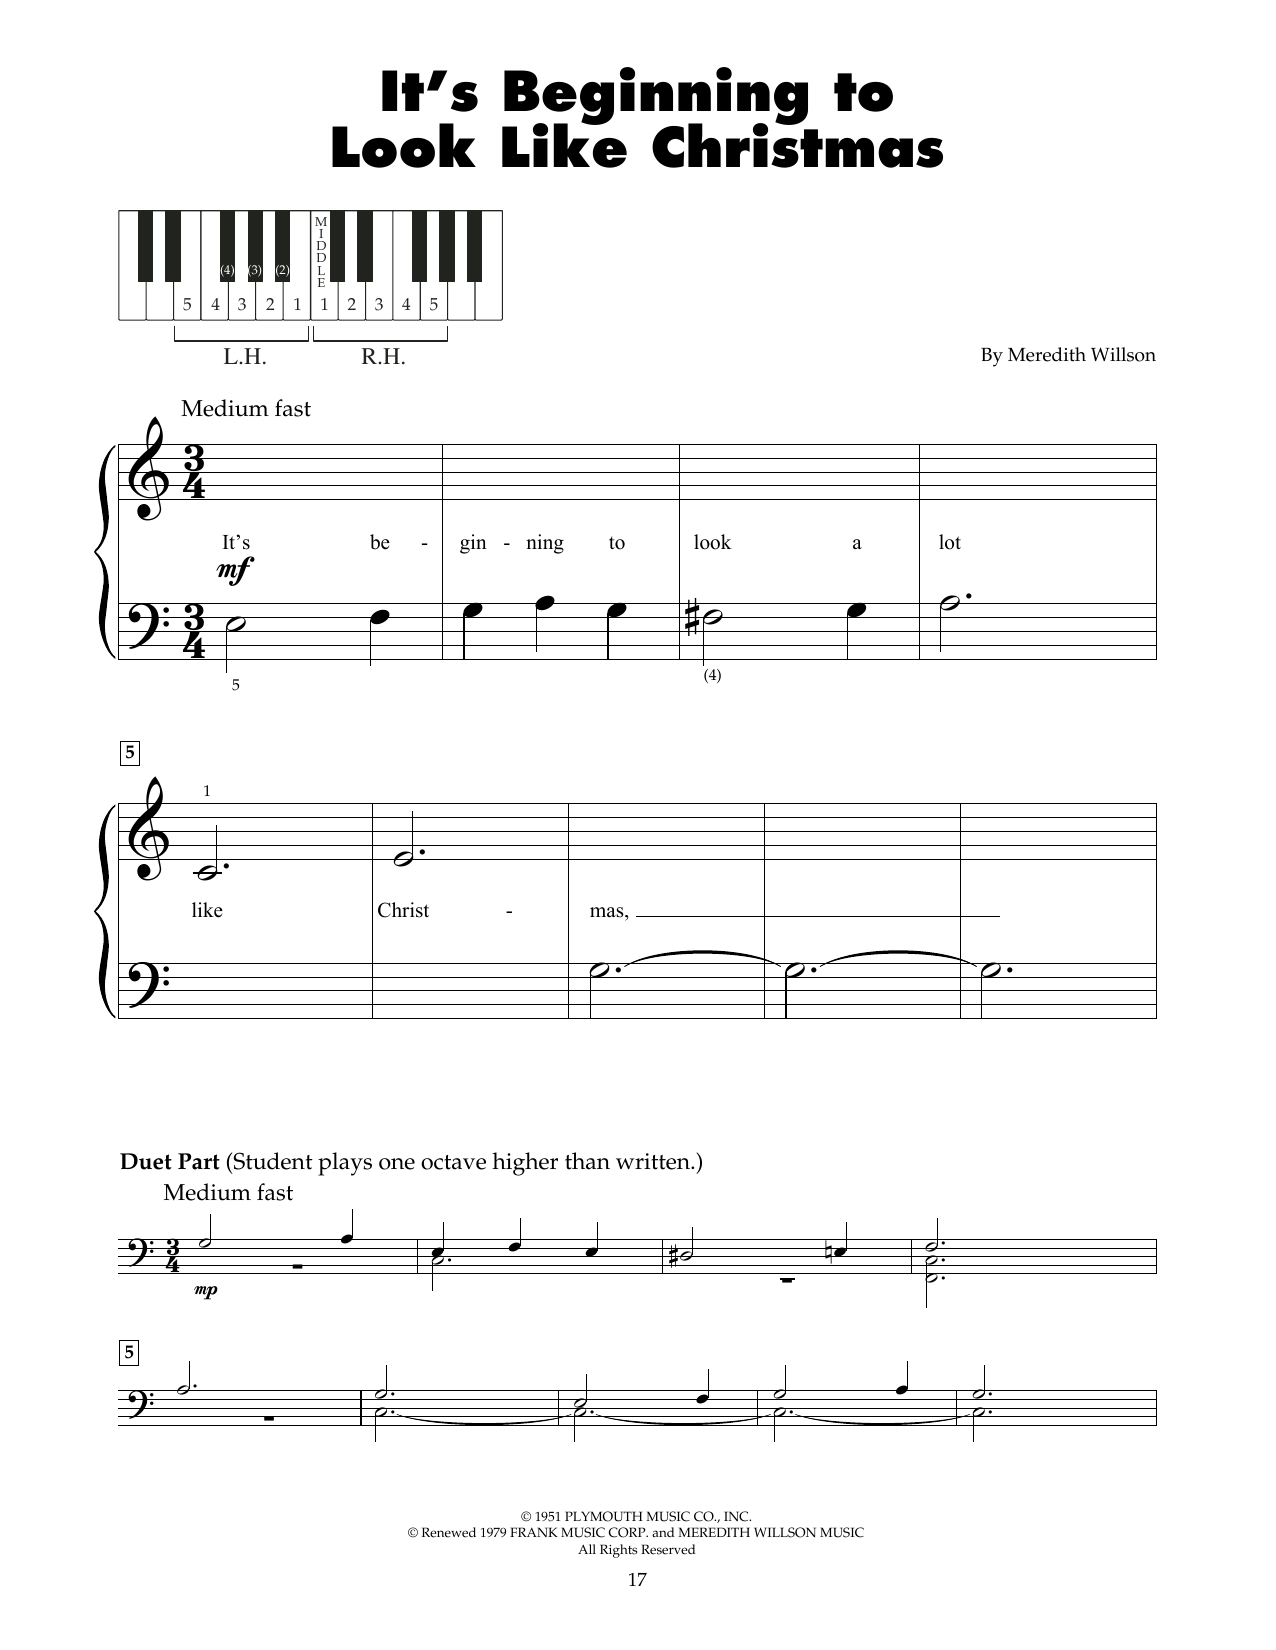 Meredith Willson It's Beginning To Look Like Christmas sheet music notes printable PDF score